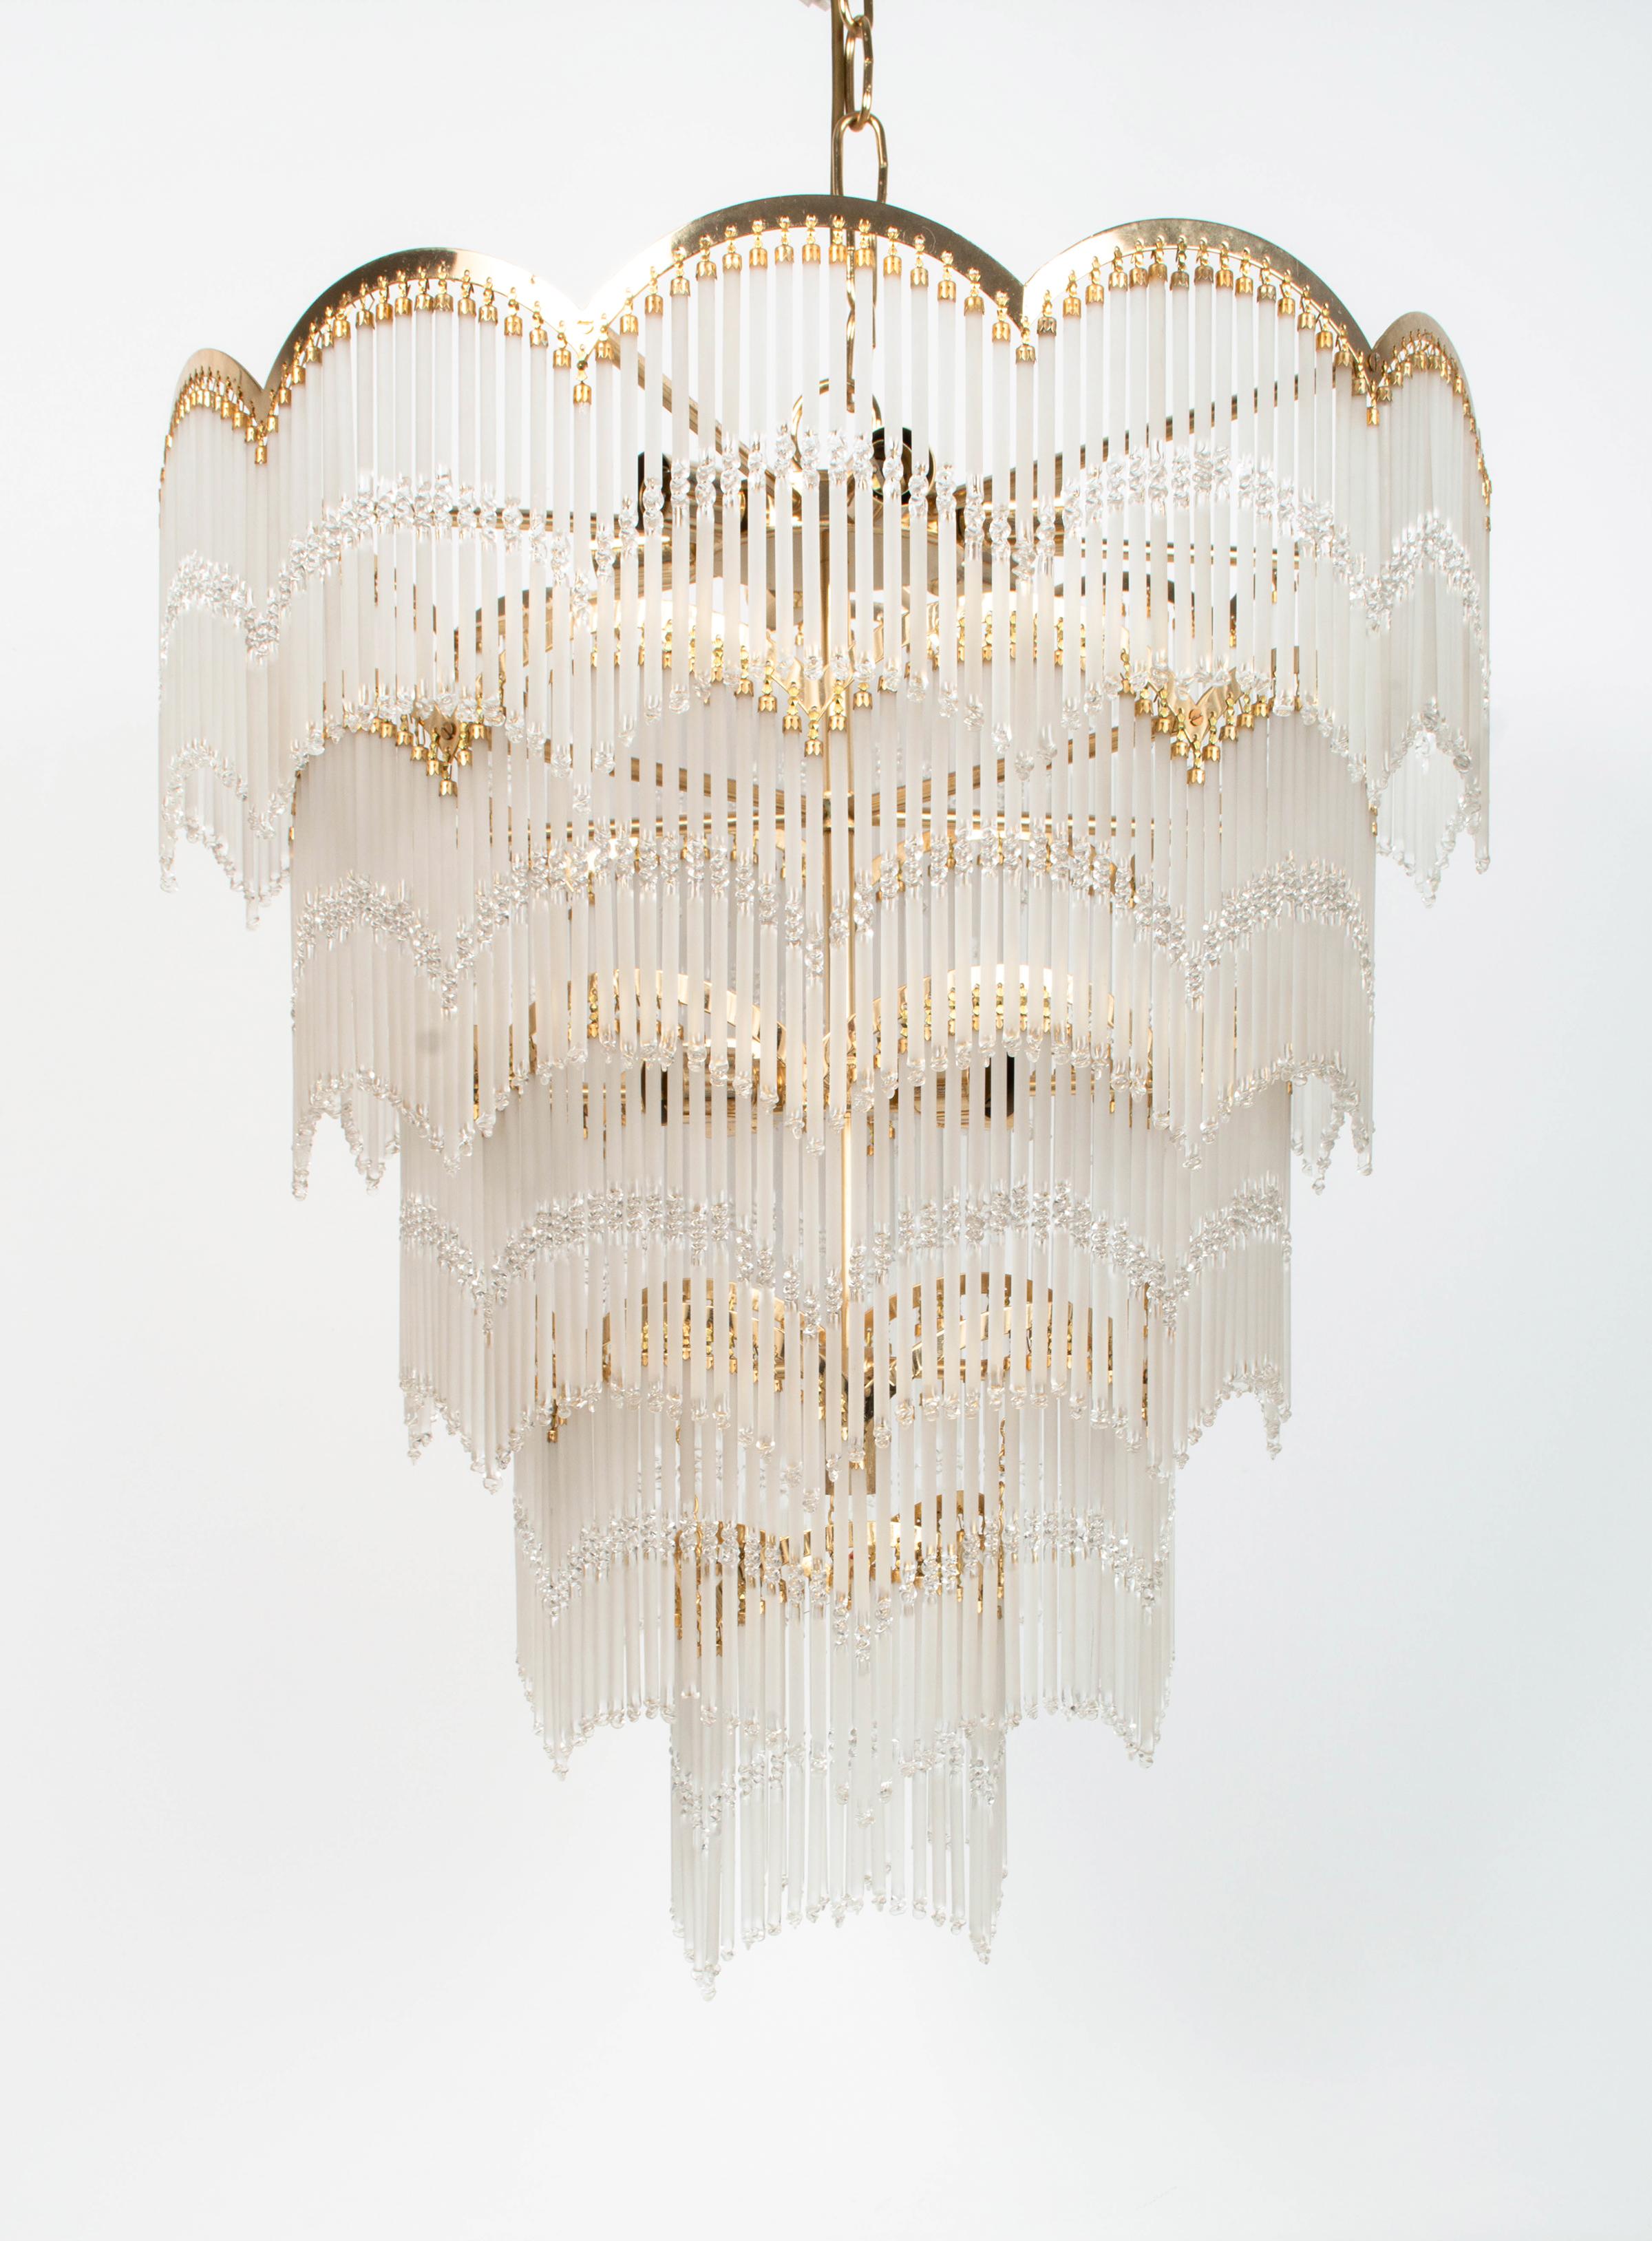 A large five tier waterfall chandelier, England C.1970

The gilt frame hung with five tiers of frosted glass cylinders. 
Eleven bulb.

Measures: Body: 70cm high x 60cm diameter

Chain Additional 32cm in height.

A stunning statement piece, in